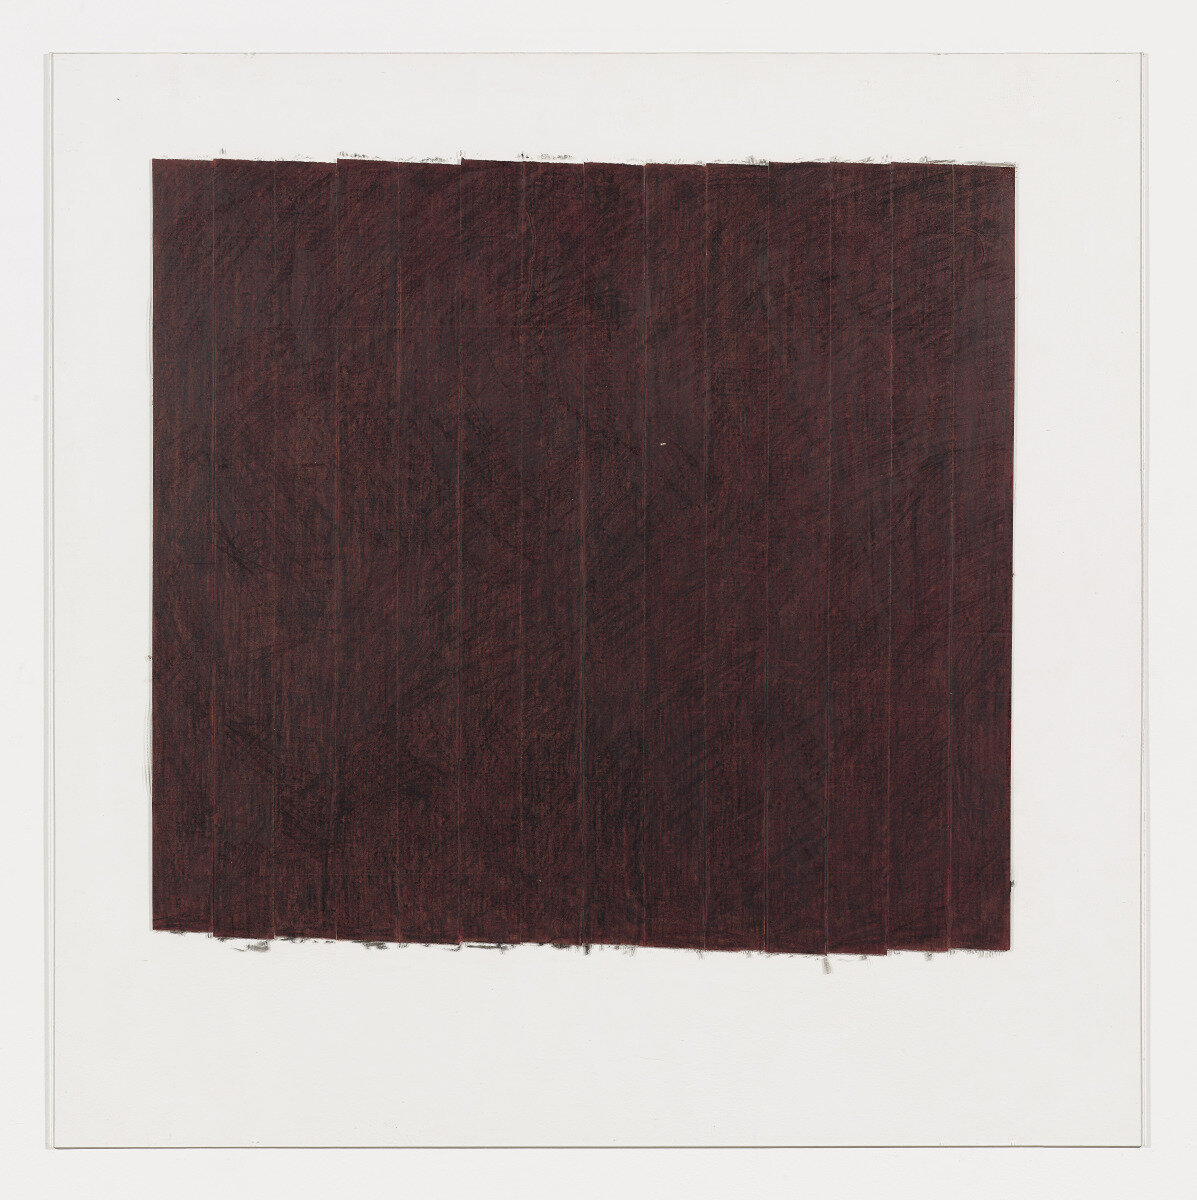  Untitled B, 1977, 36 x 36 inches, pastel and tape on Plexiglass 